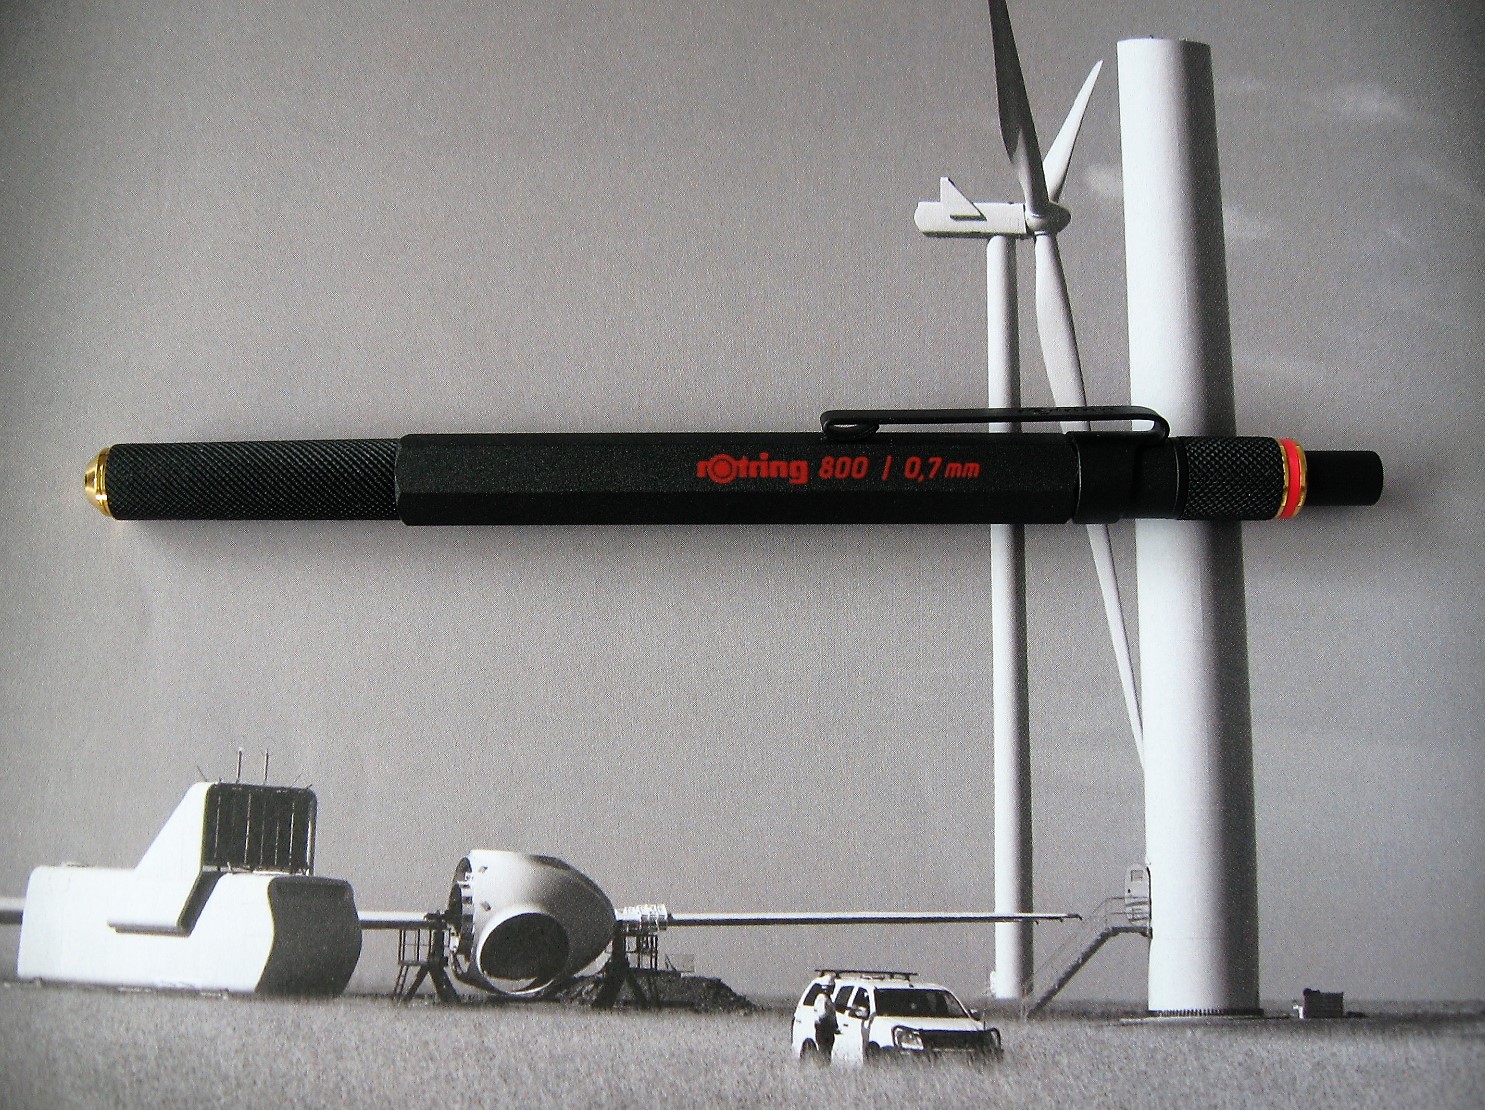 Rotring 800 Mechanical Pencil Review – Gentleman Reviewer